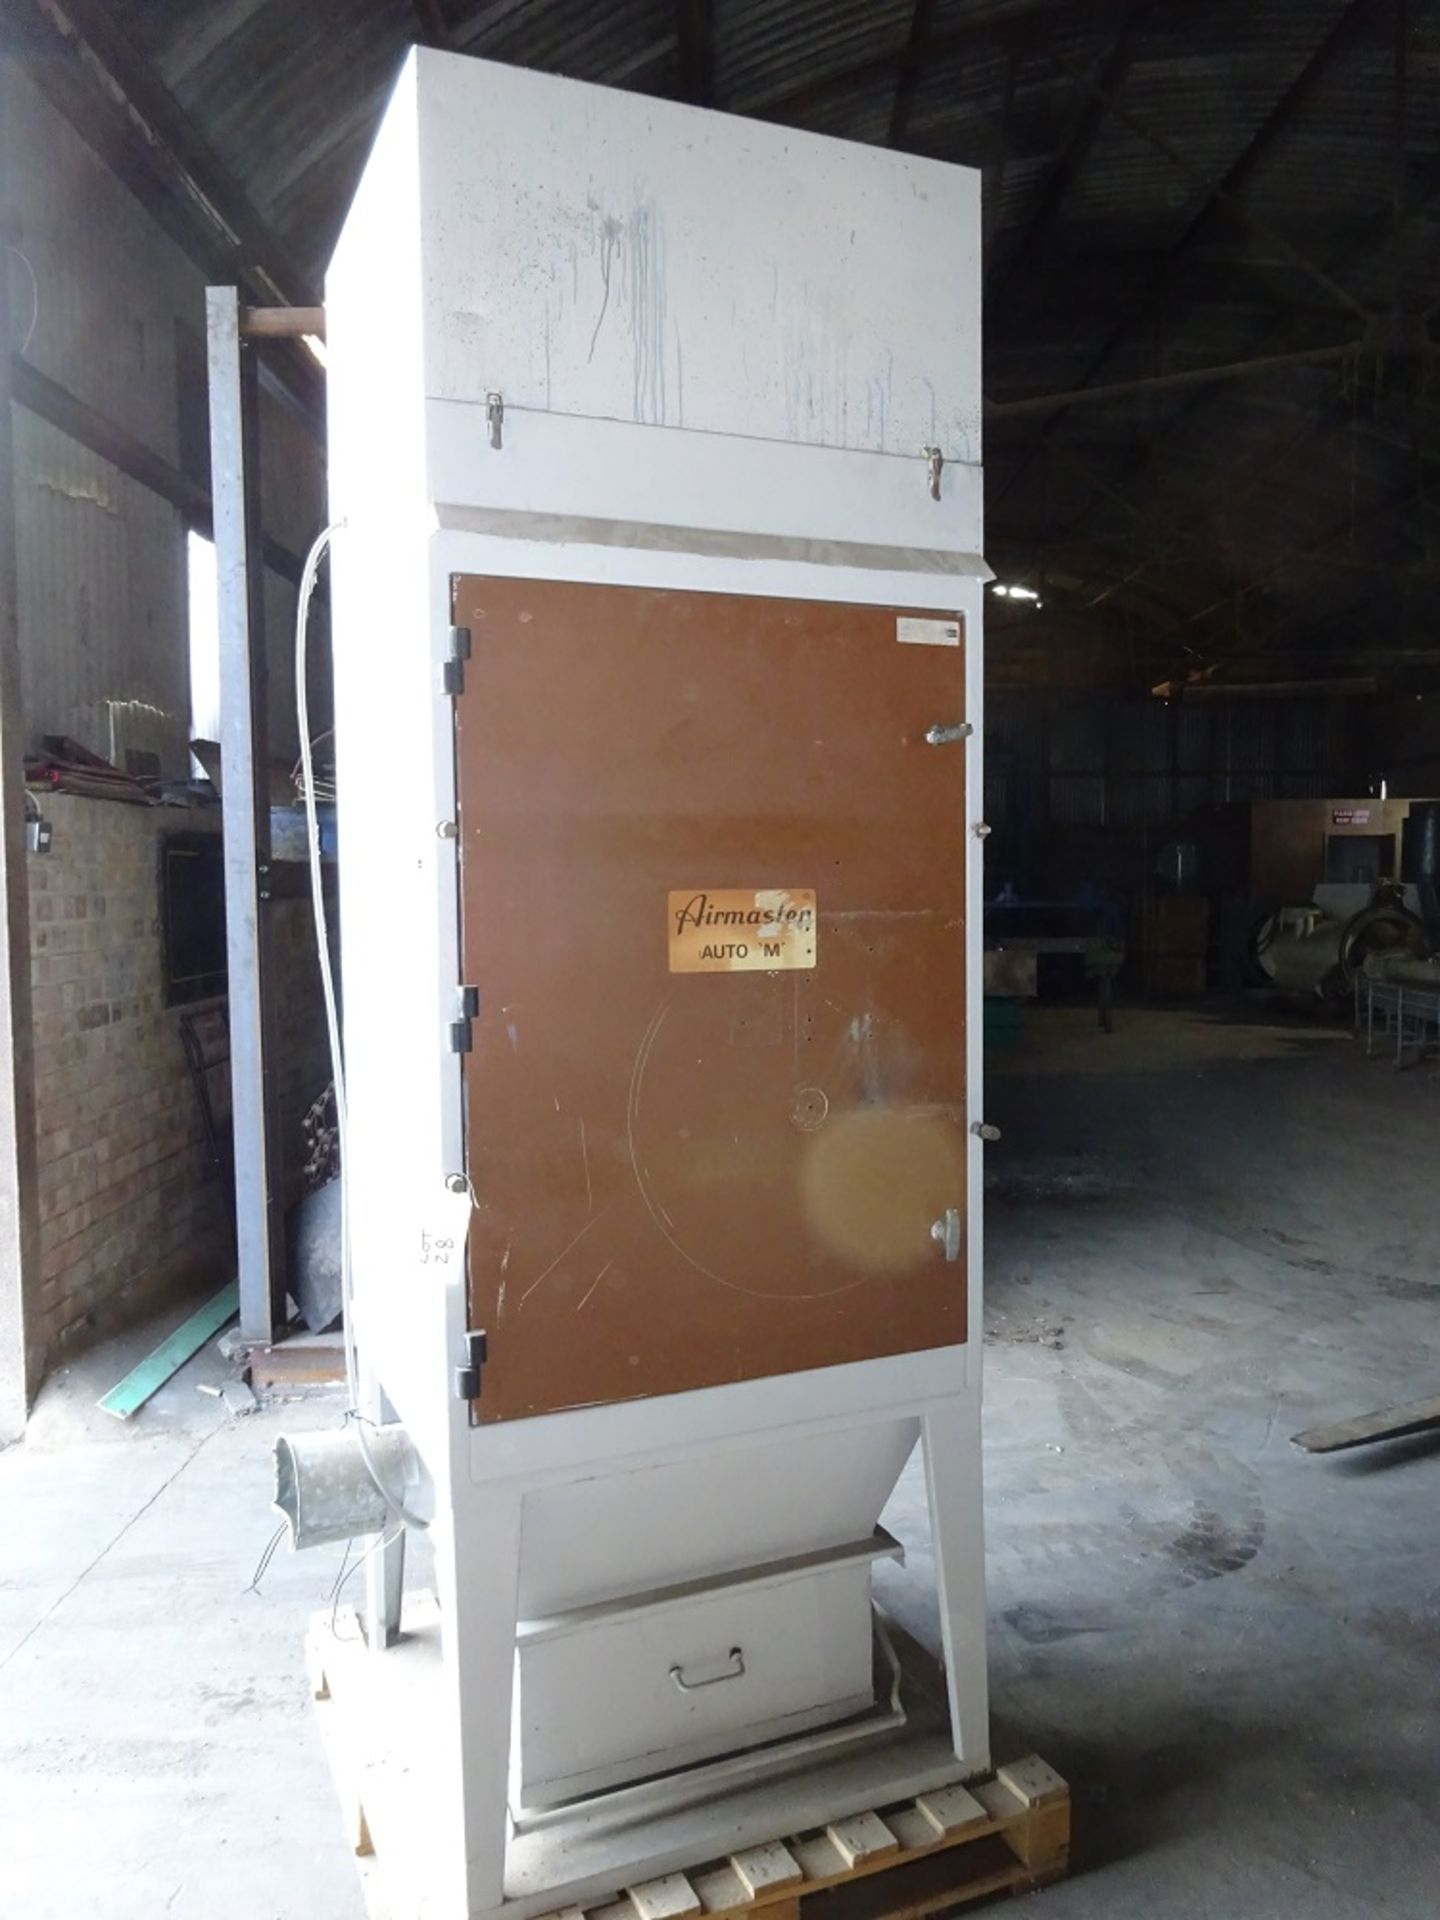 Airmaster dust collector believed to be an M10 with acoustic hood. Lot located Gloucester. Free - Image 2 of 5